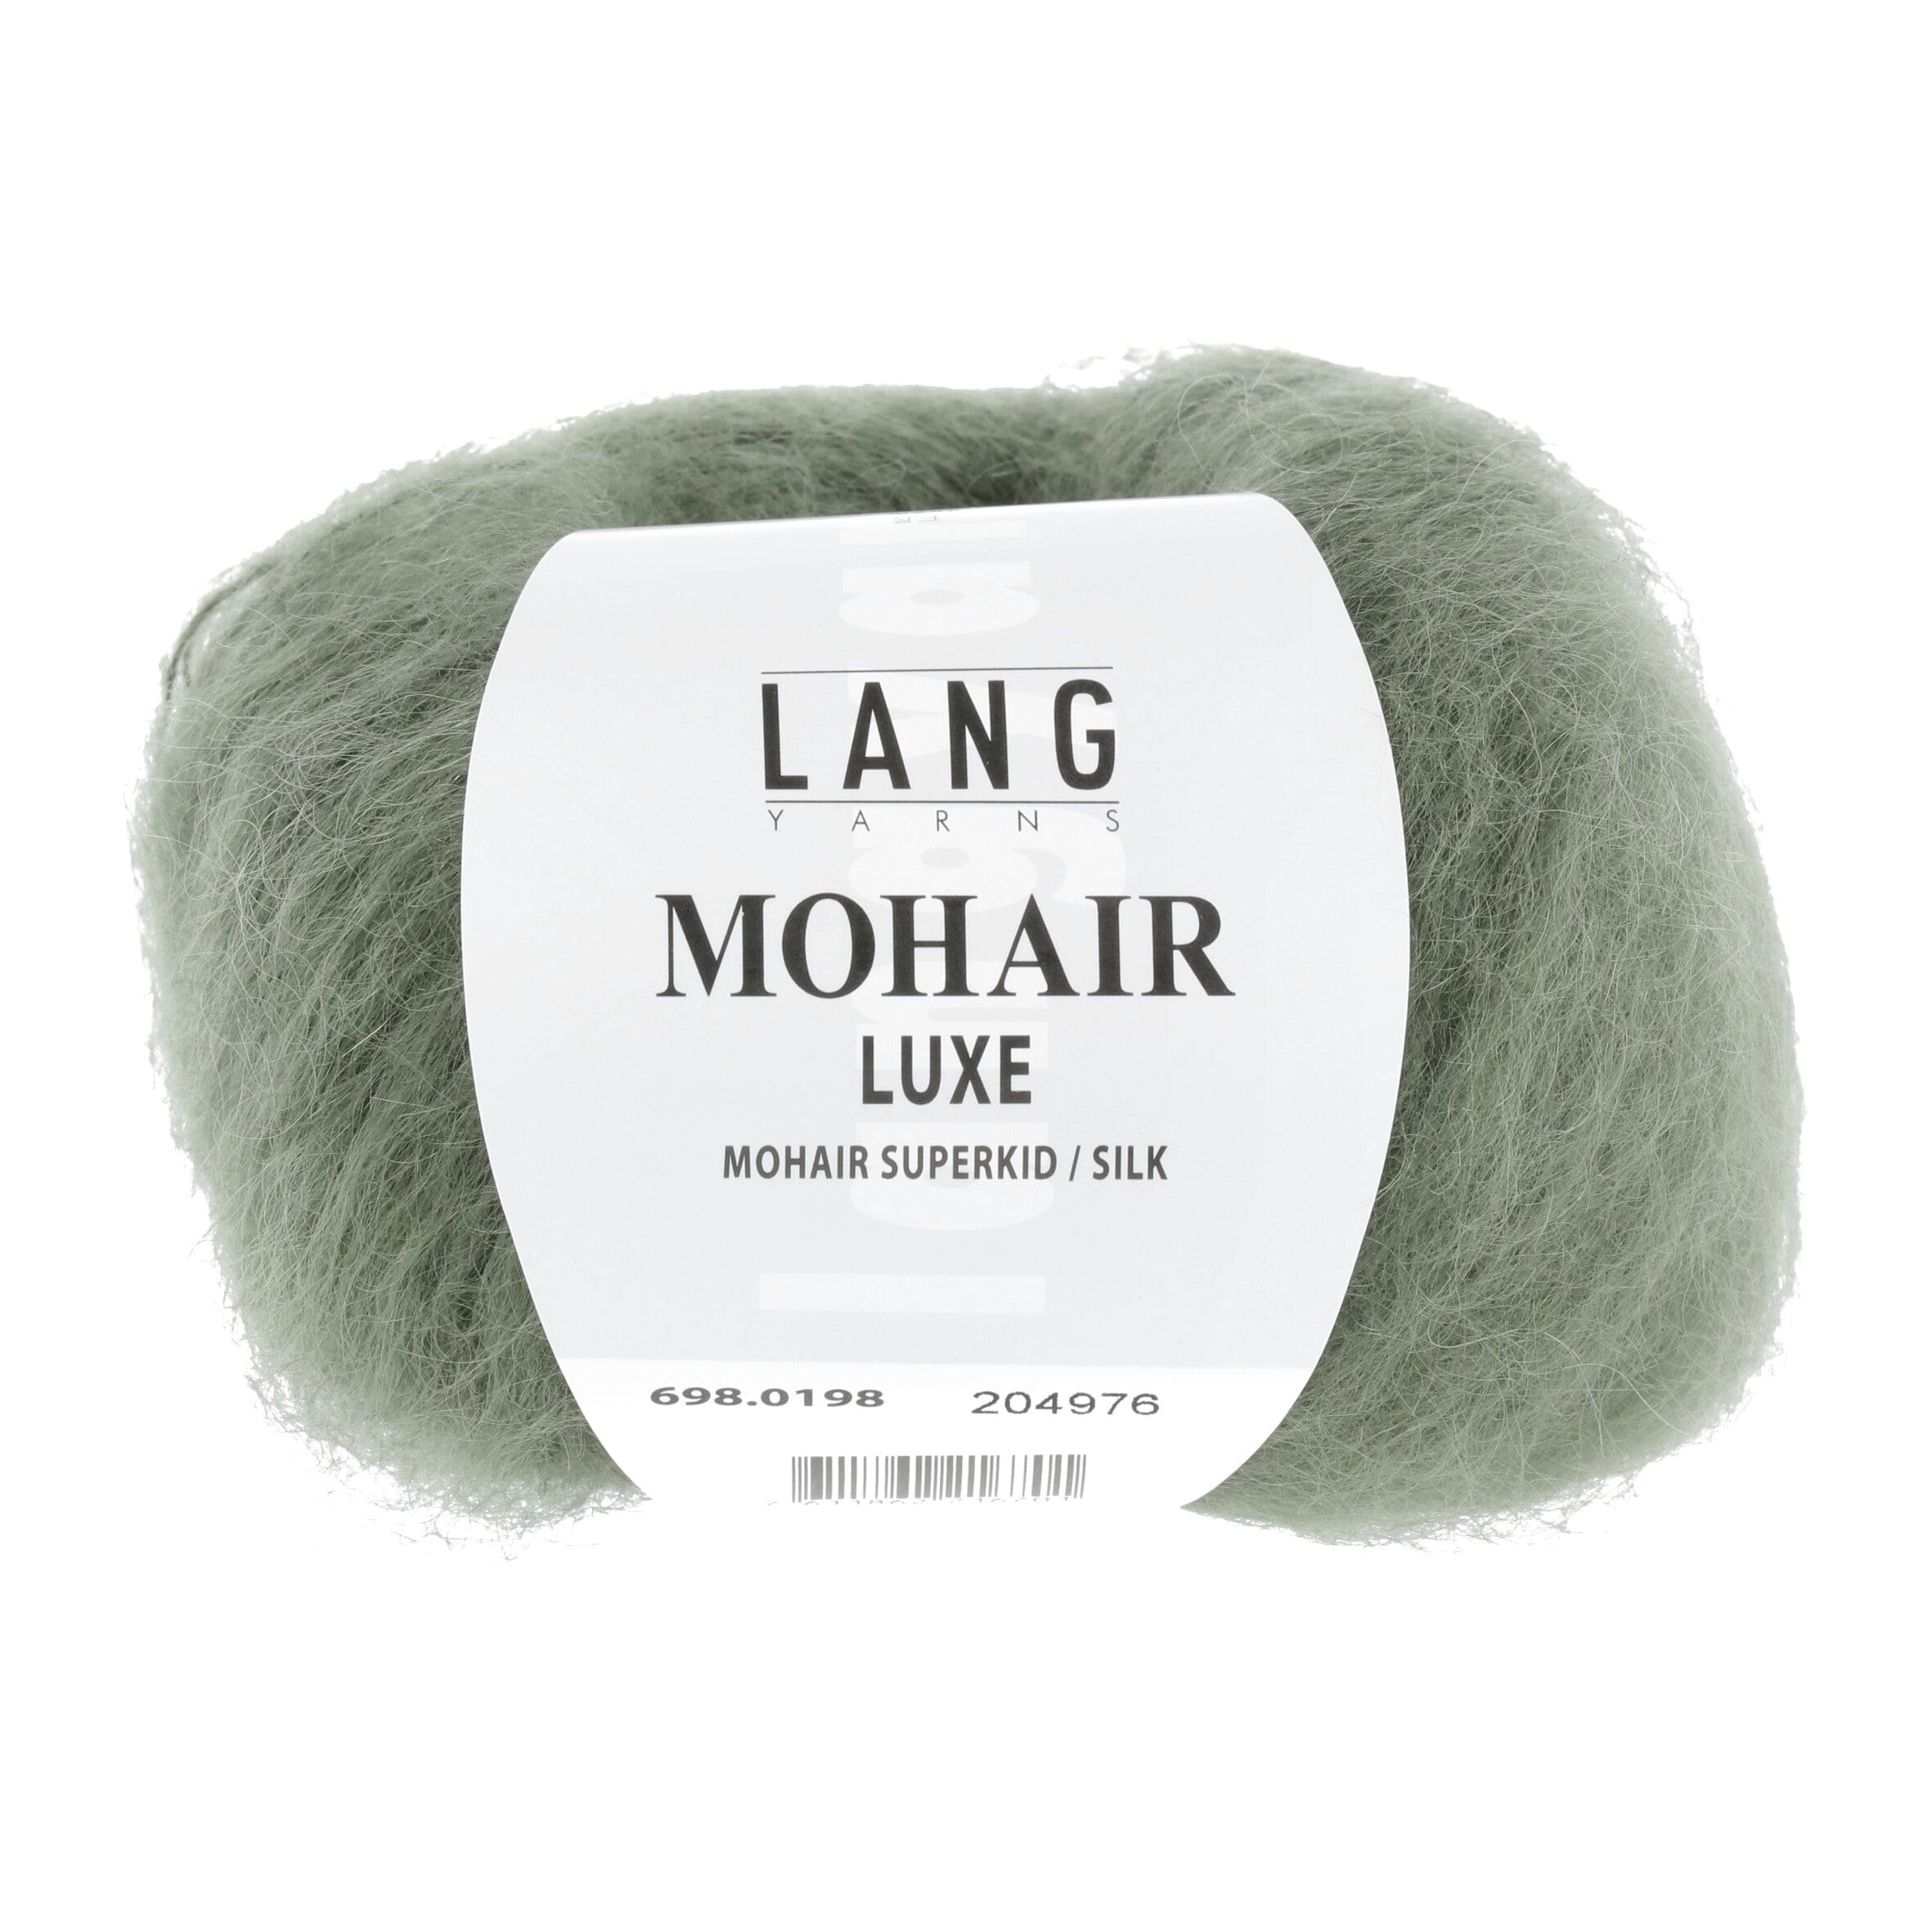 LANG YARNS Garn 0198 - olive MOHAIR LUXE